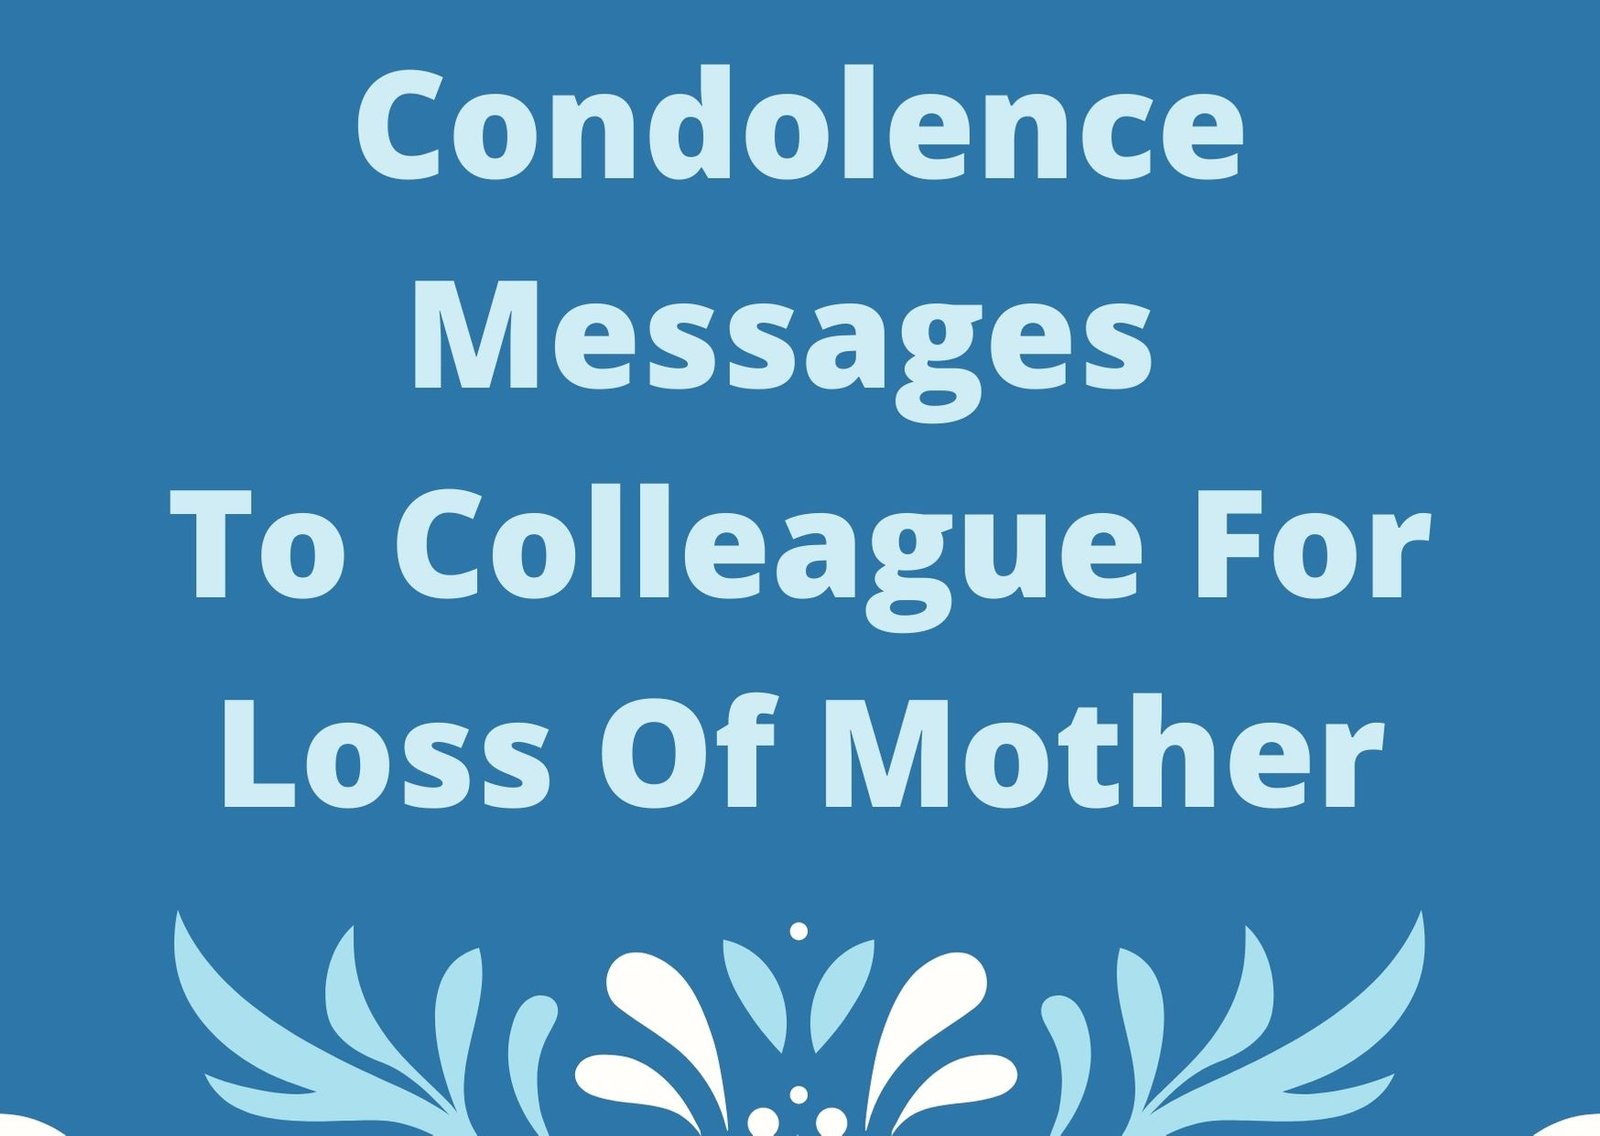 condolence message for mother